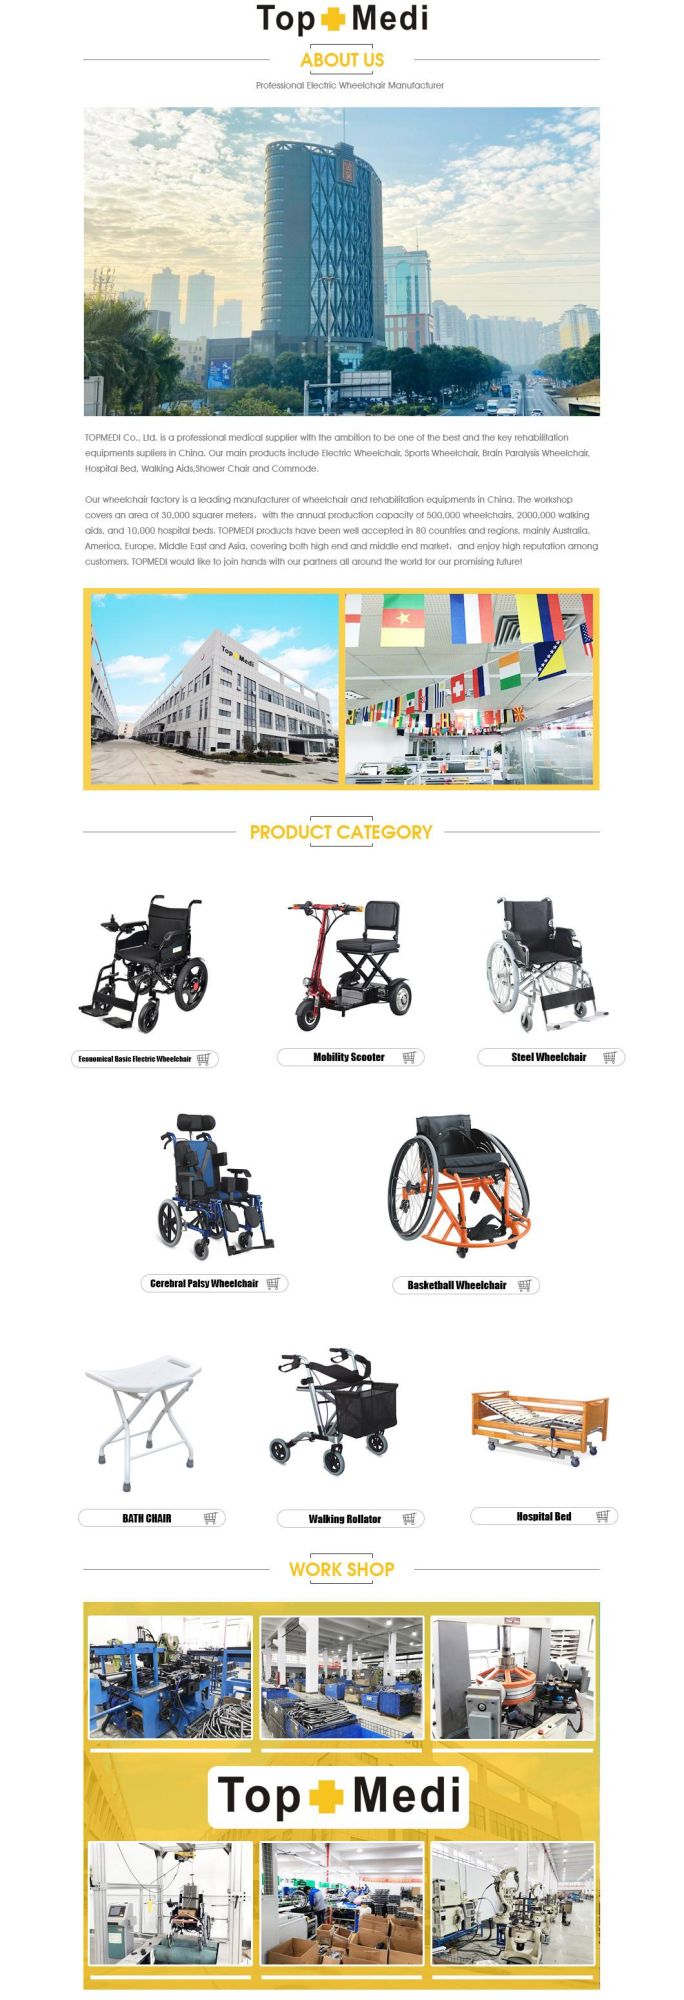 One Key Automatic Folding Lightweight Power Electric Wheelchair for Disabled